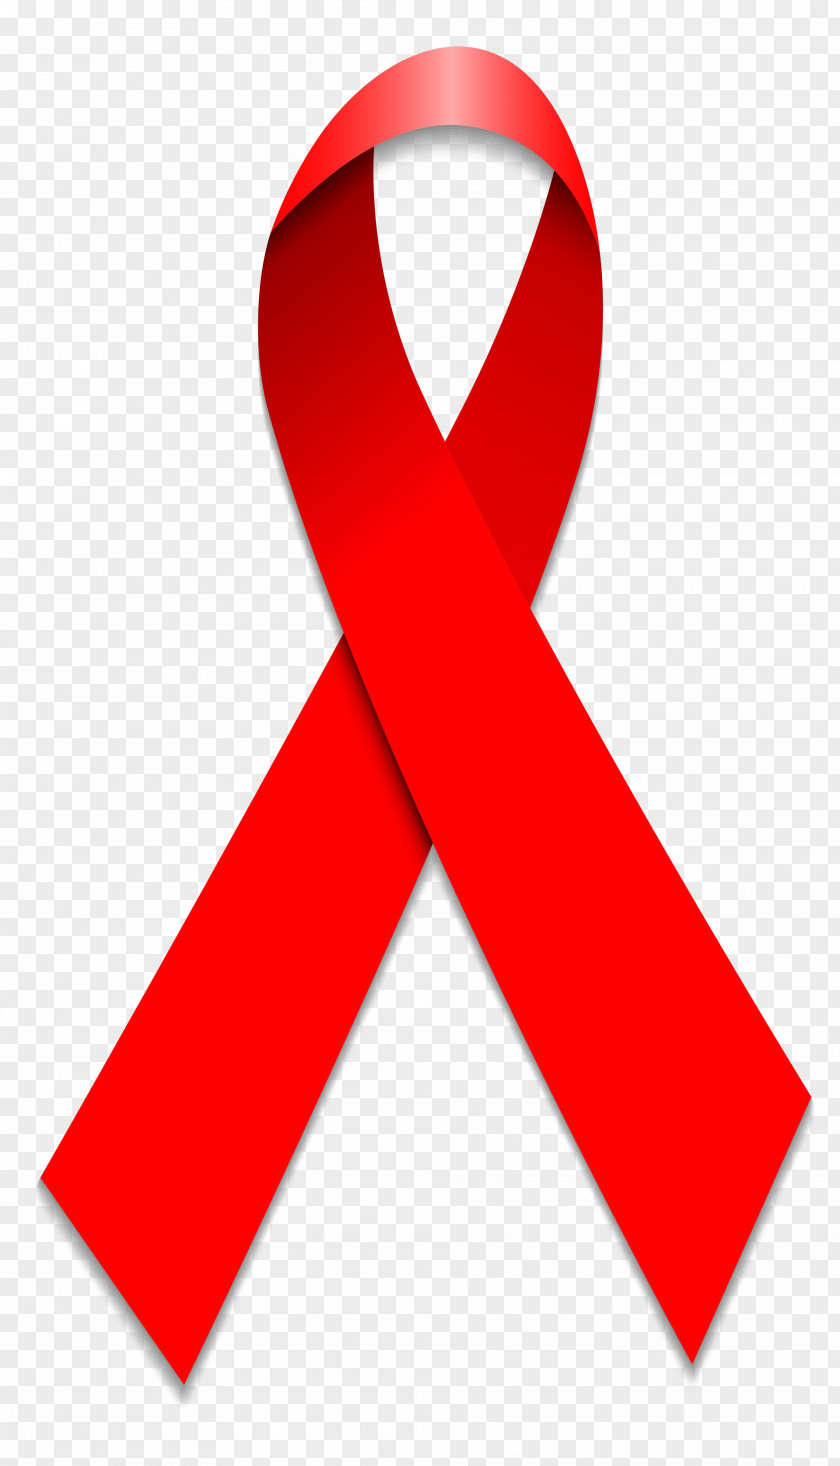 Nelson Mandela World AIDS Day Management Of HIV/AIDS December 1 HIV-positive People PNG